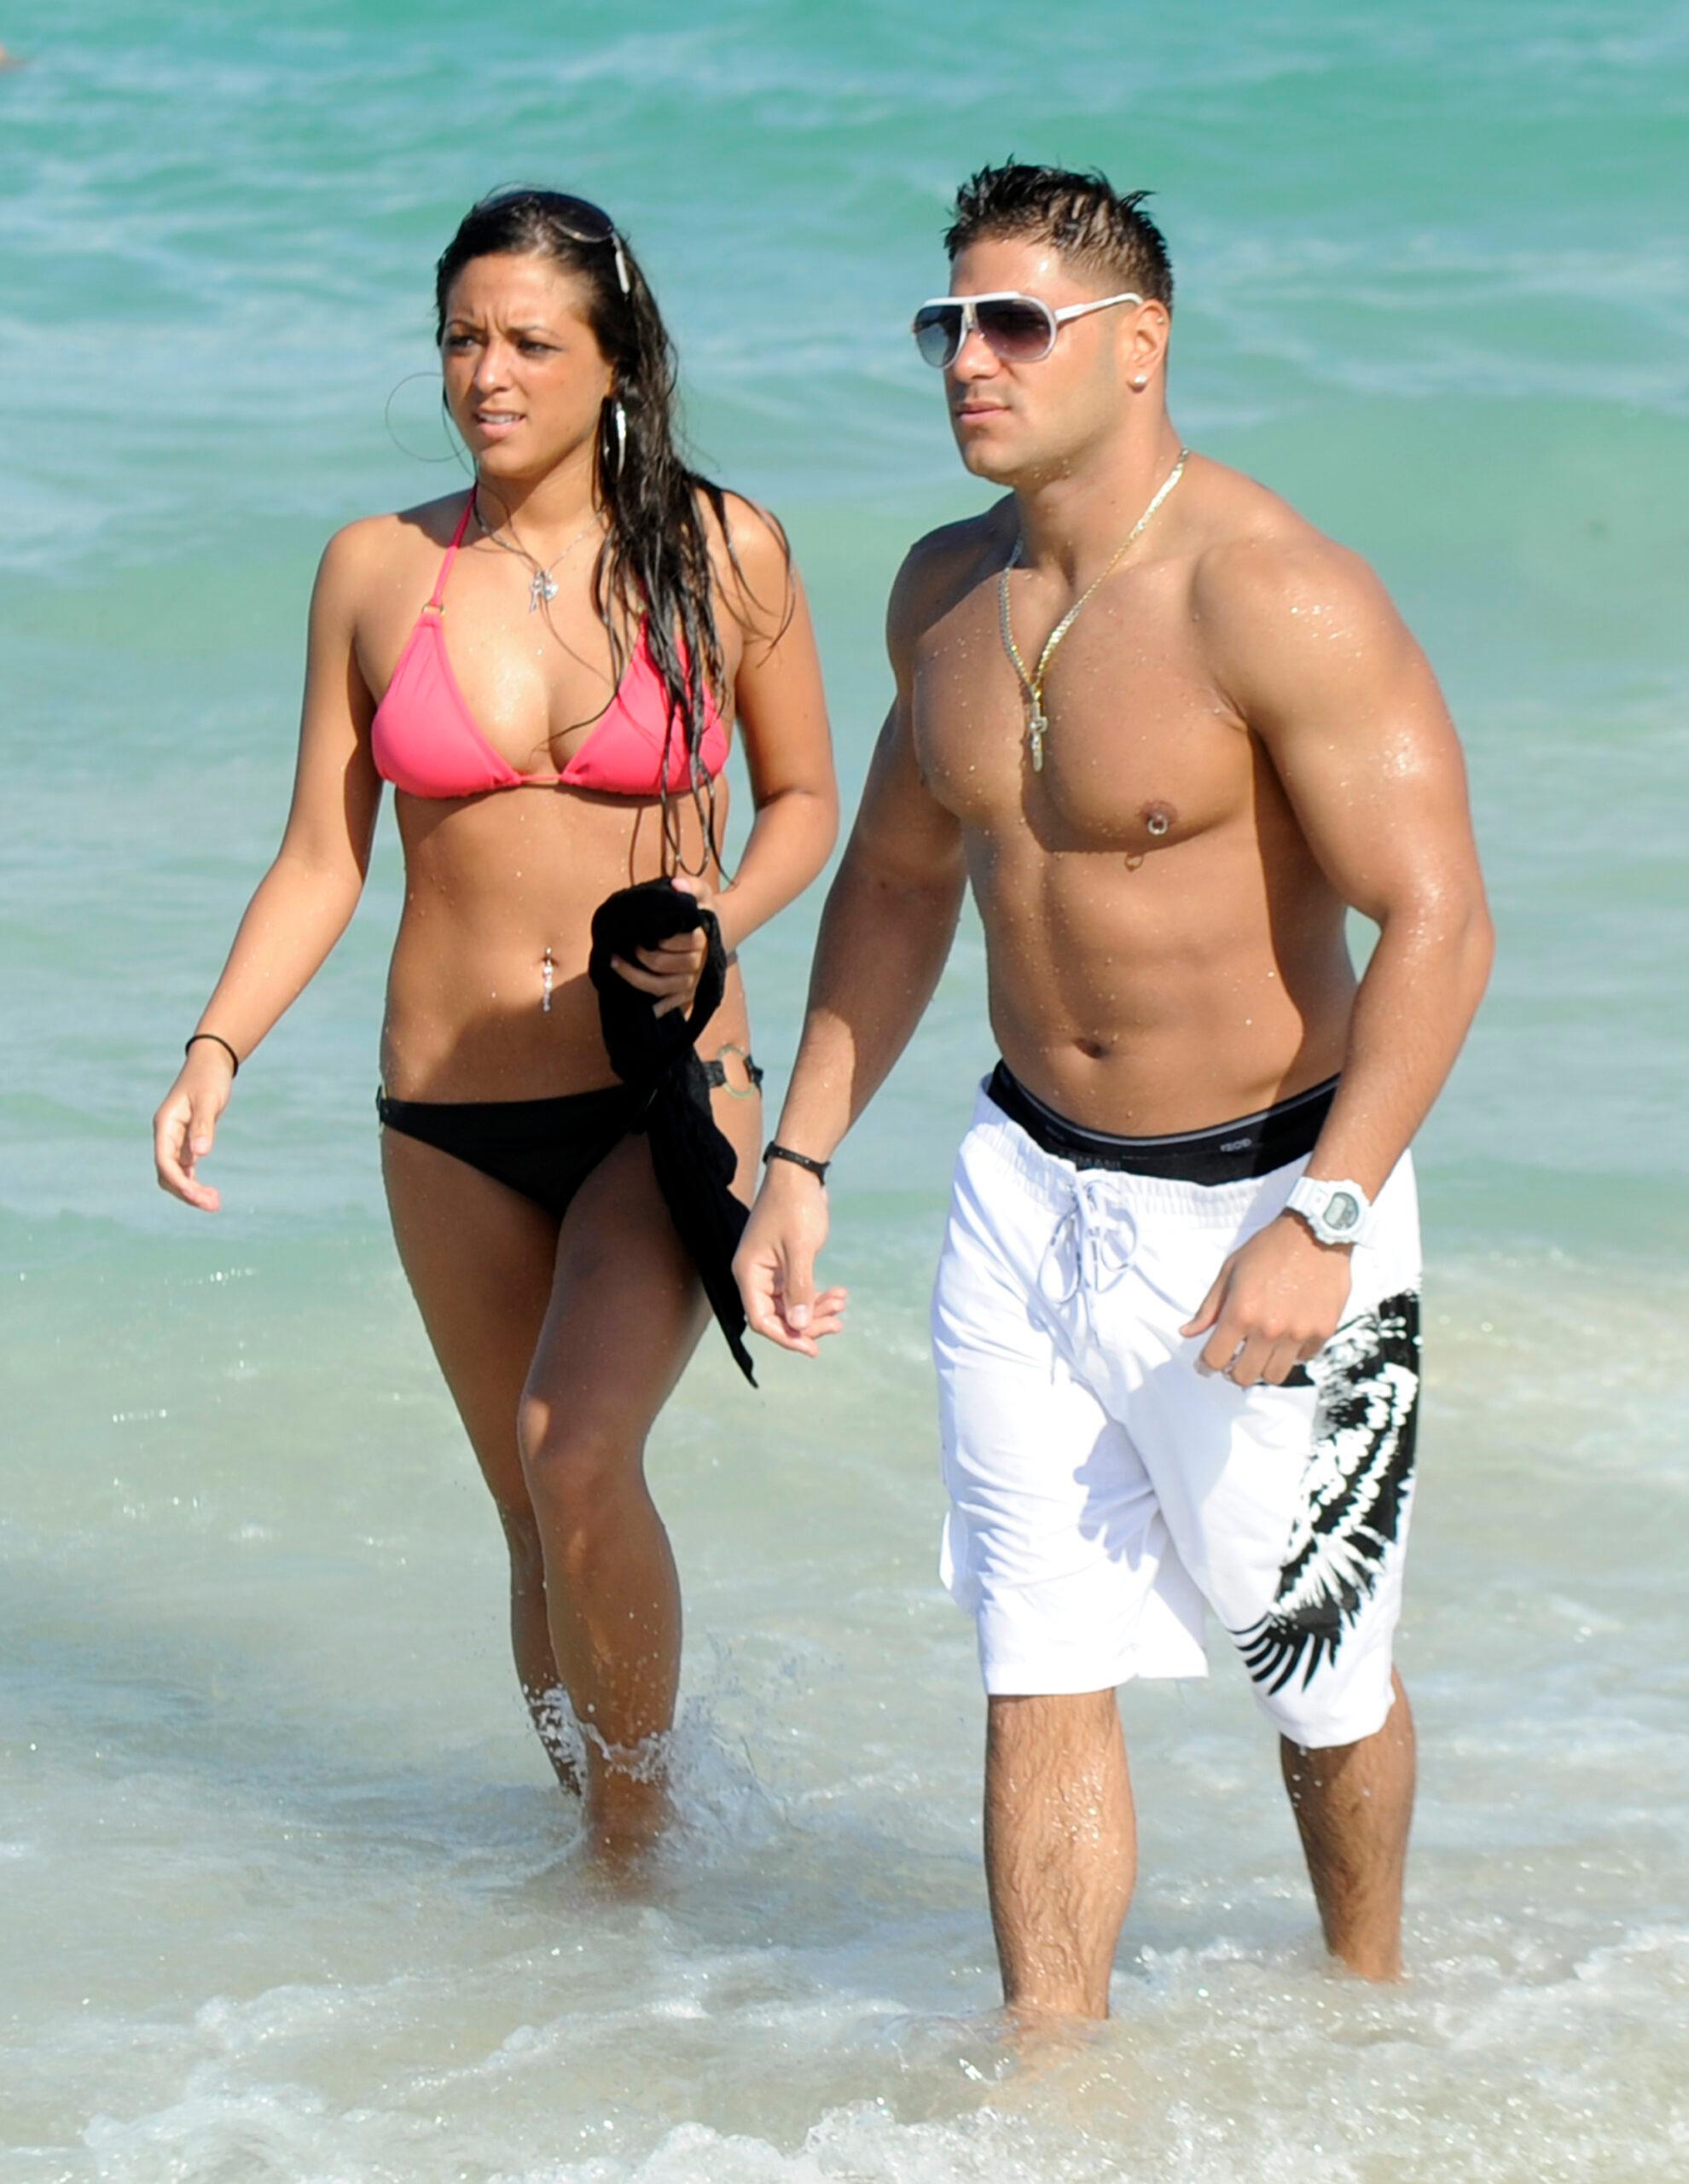 Jersey Shore cast members Sammi quot Sweetheart quot Giancola and Ronnie Ortiz-Magro show PDA on the beach in Miami